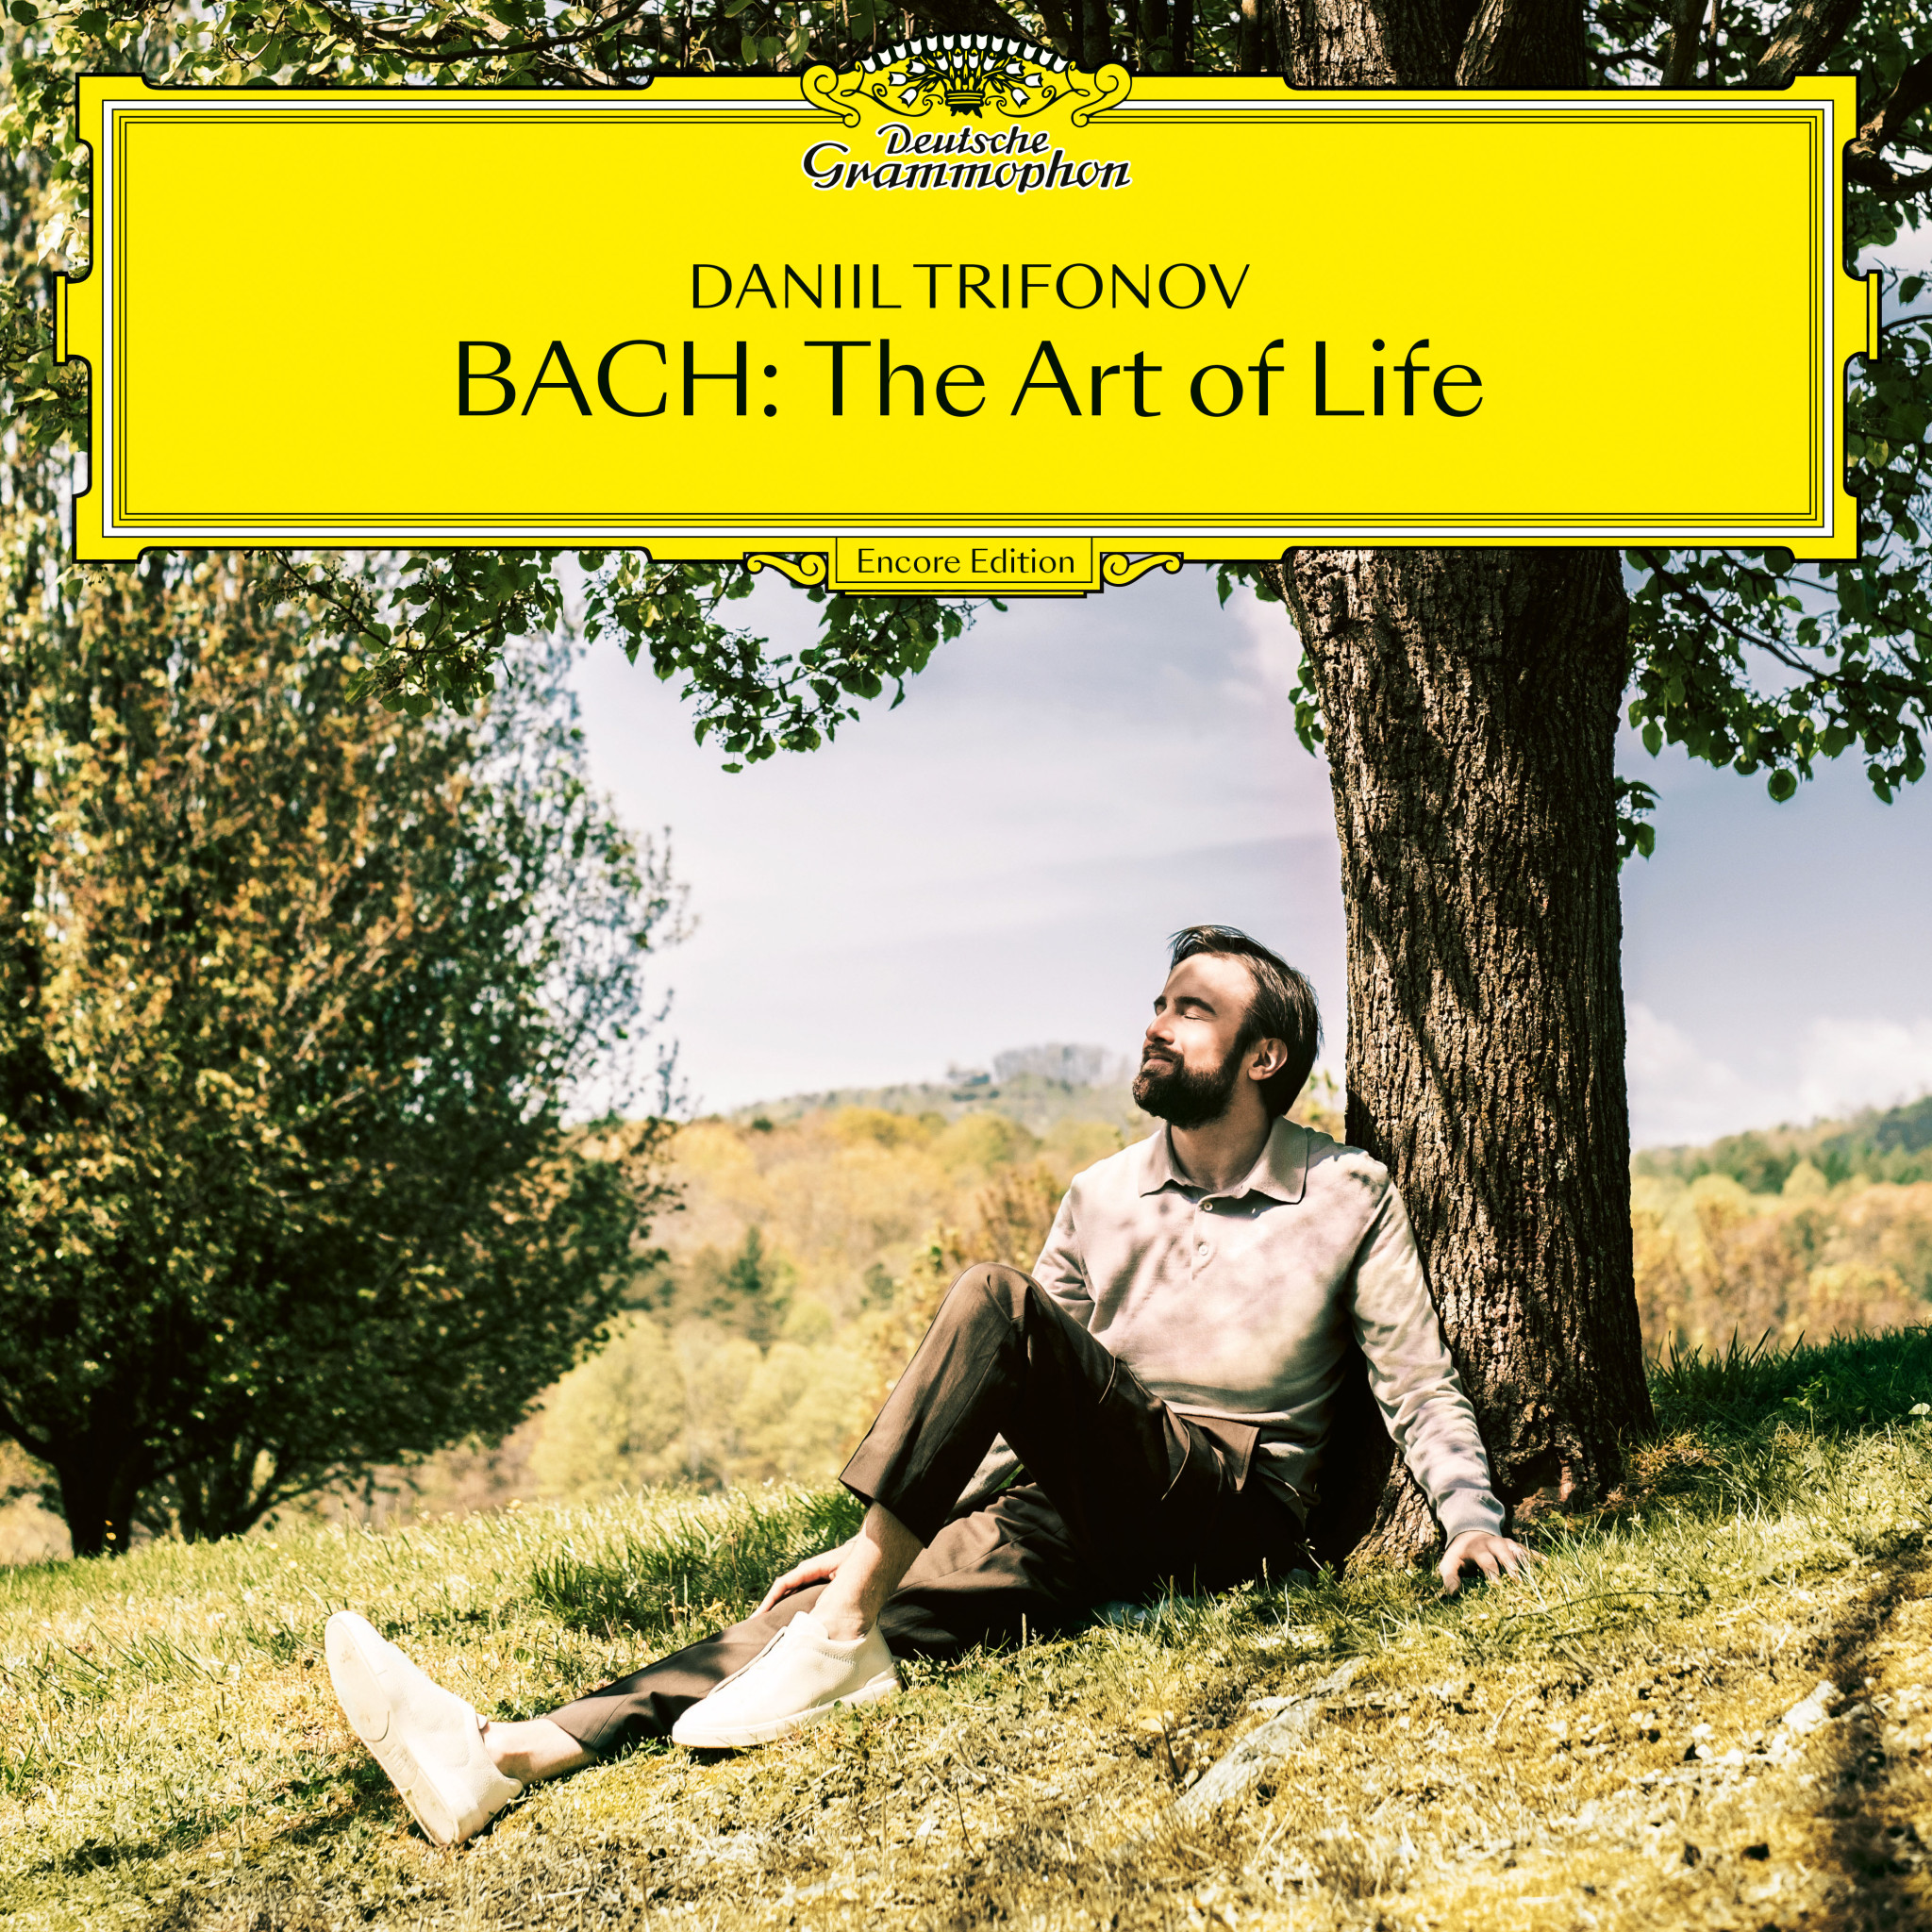 Bach: The Art of Life